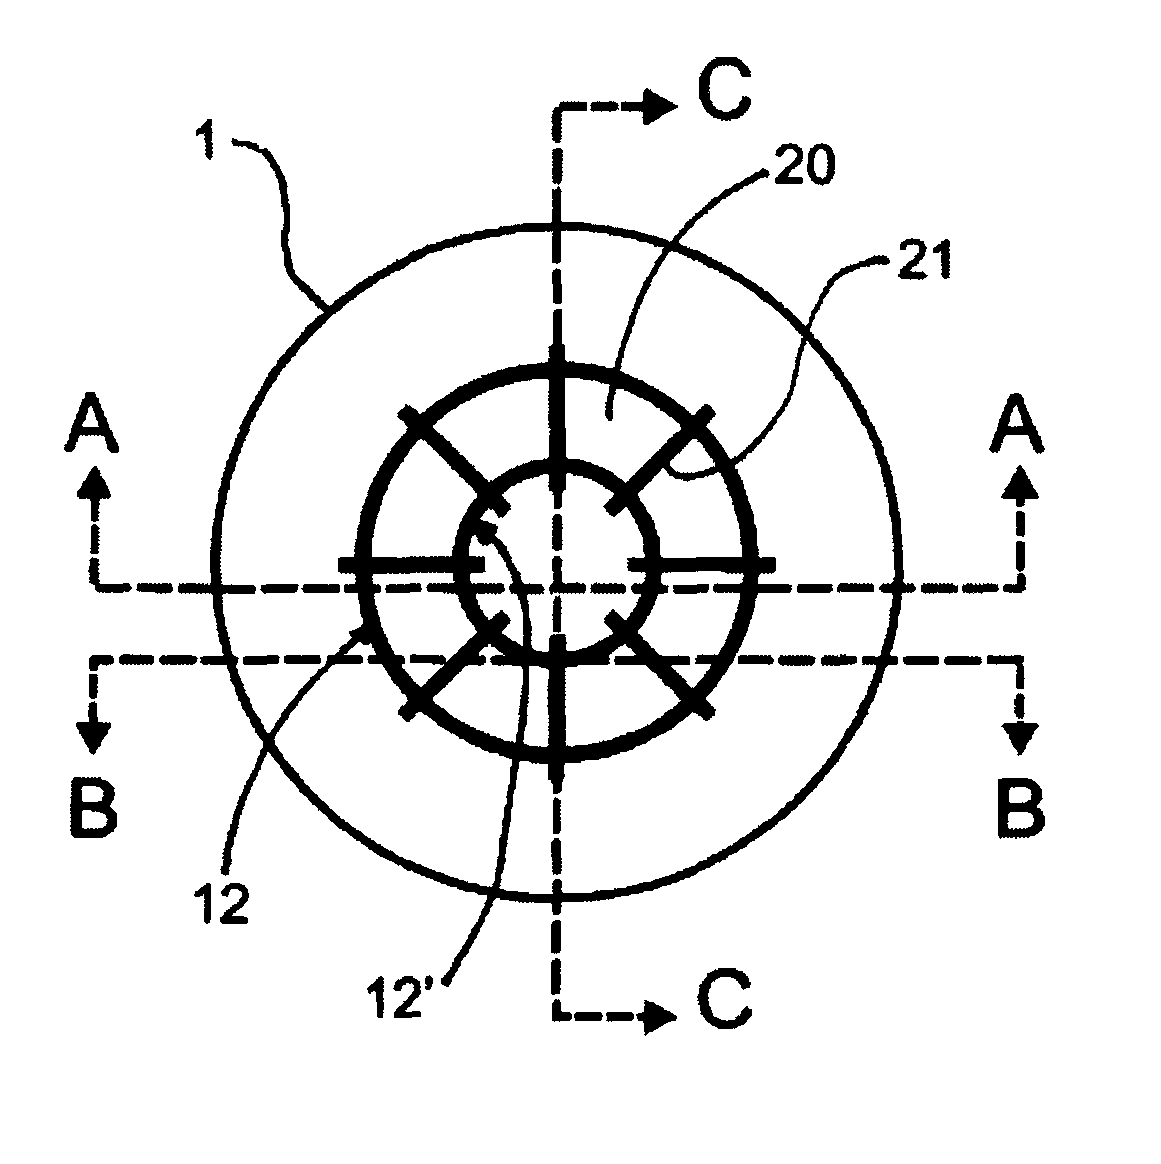 Control device for a surgical laser